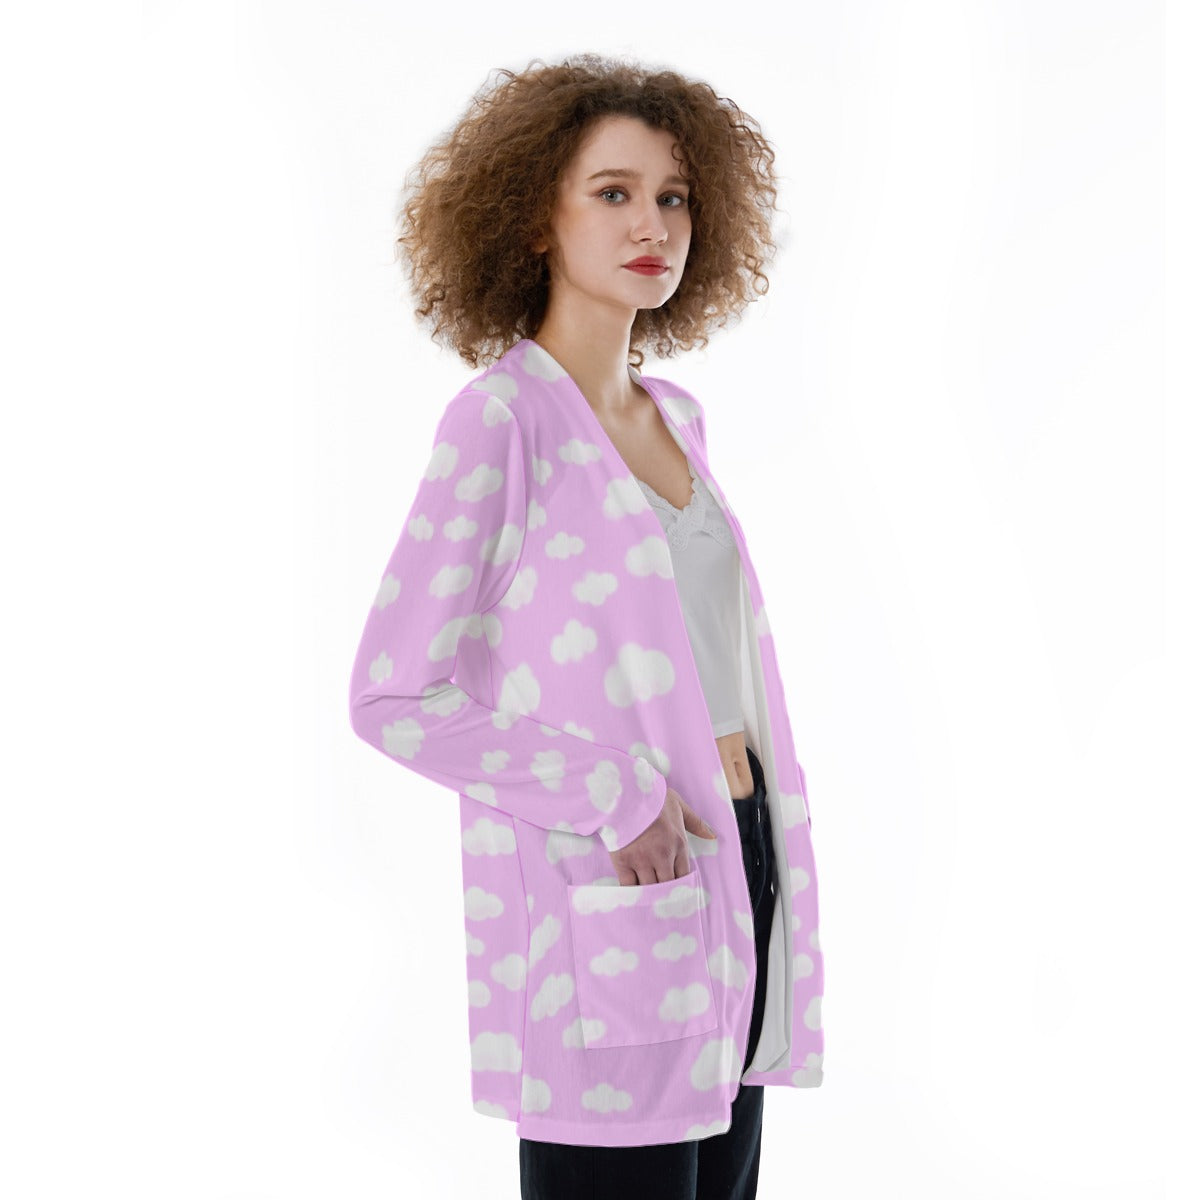 Dreamy Clouds Open Front Lightweight Cardigan With Pockets (Taffy Pink)